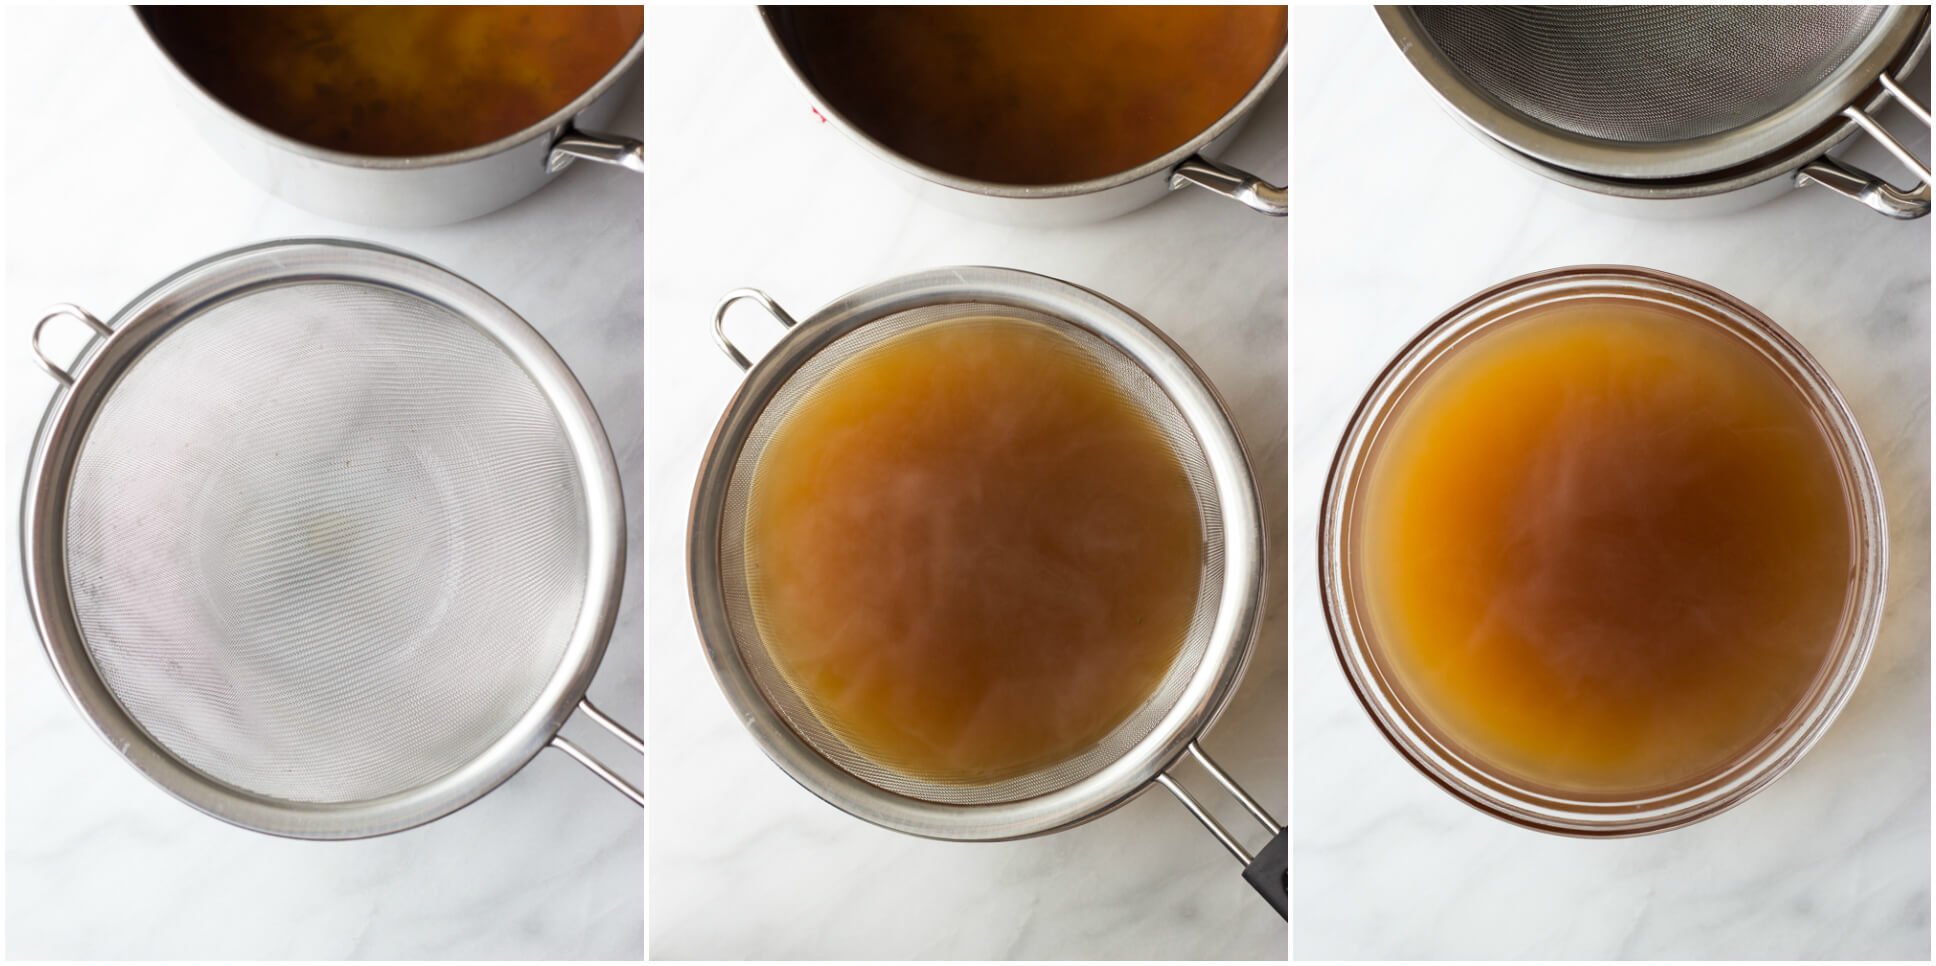 How to Make Vegetable Broth with Kitchen Scraps - homemade vegetable broth has never been easier! Save your scraps and make a broth | littlebroken.com @littlebroken